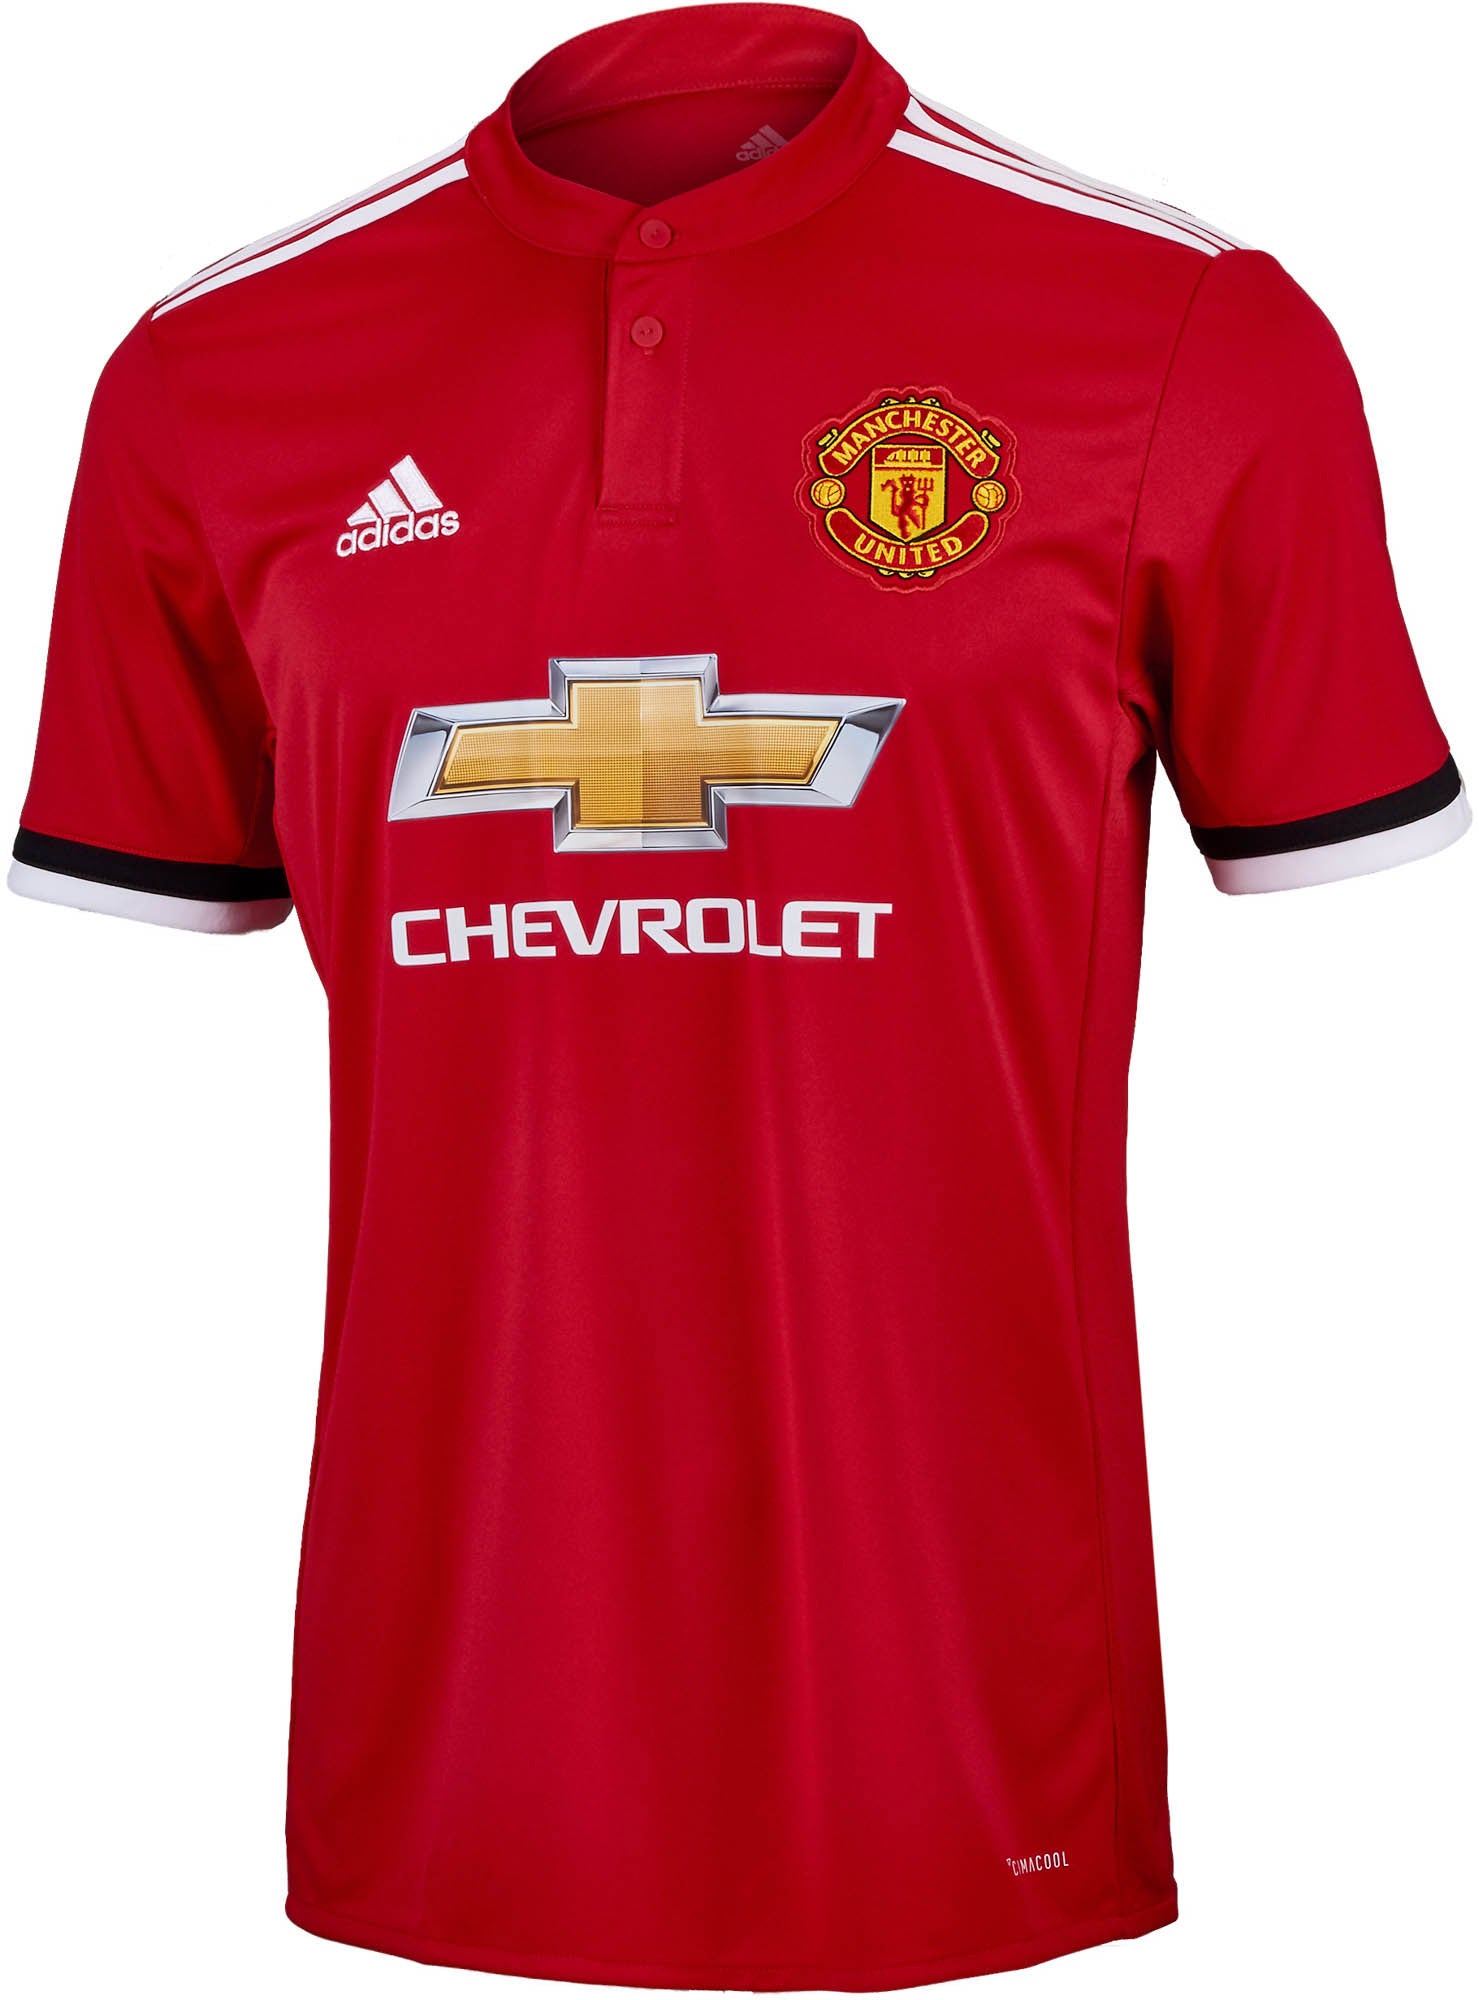 2017-18 Manchester United Home Shirt 